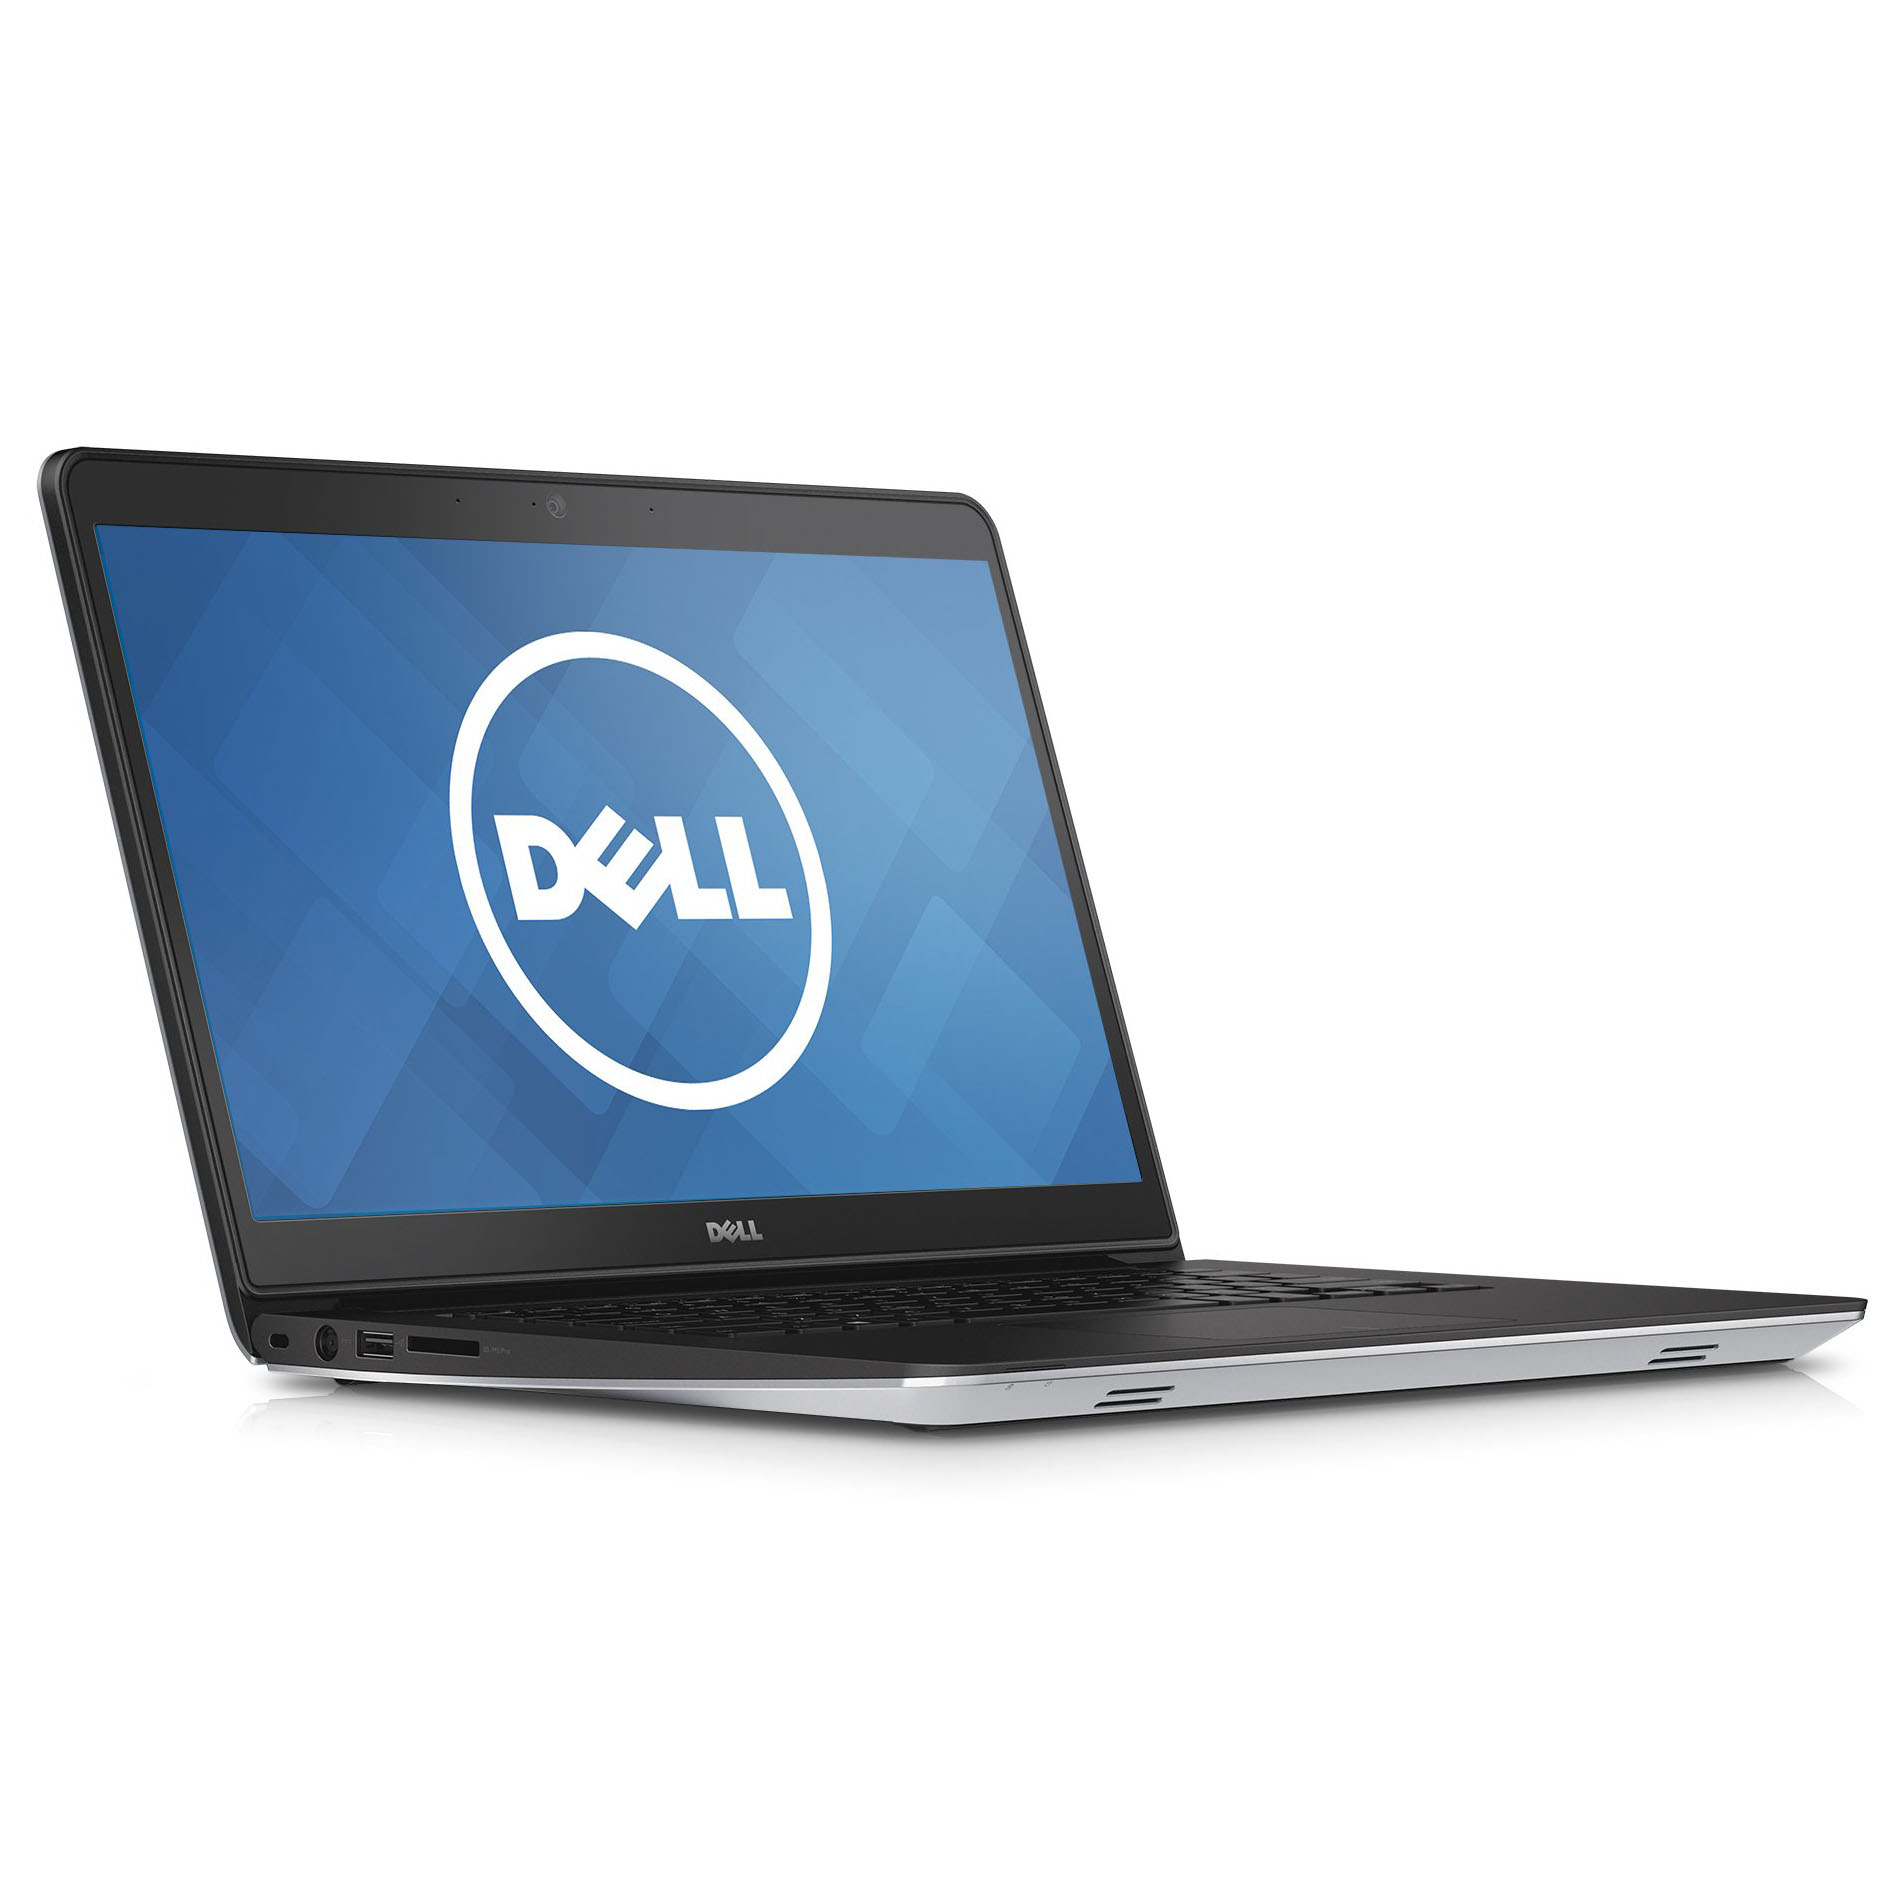 Dell Inspiron 14 5442 Notebook